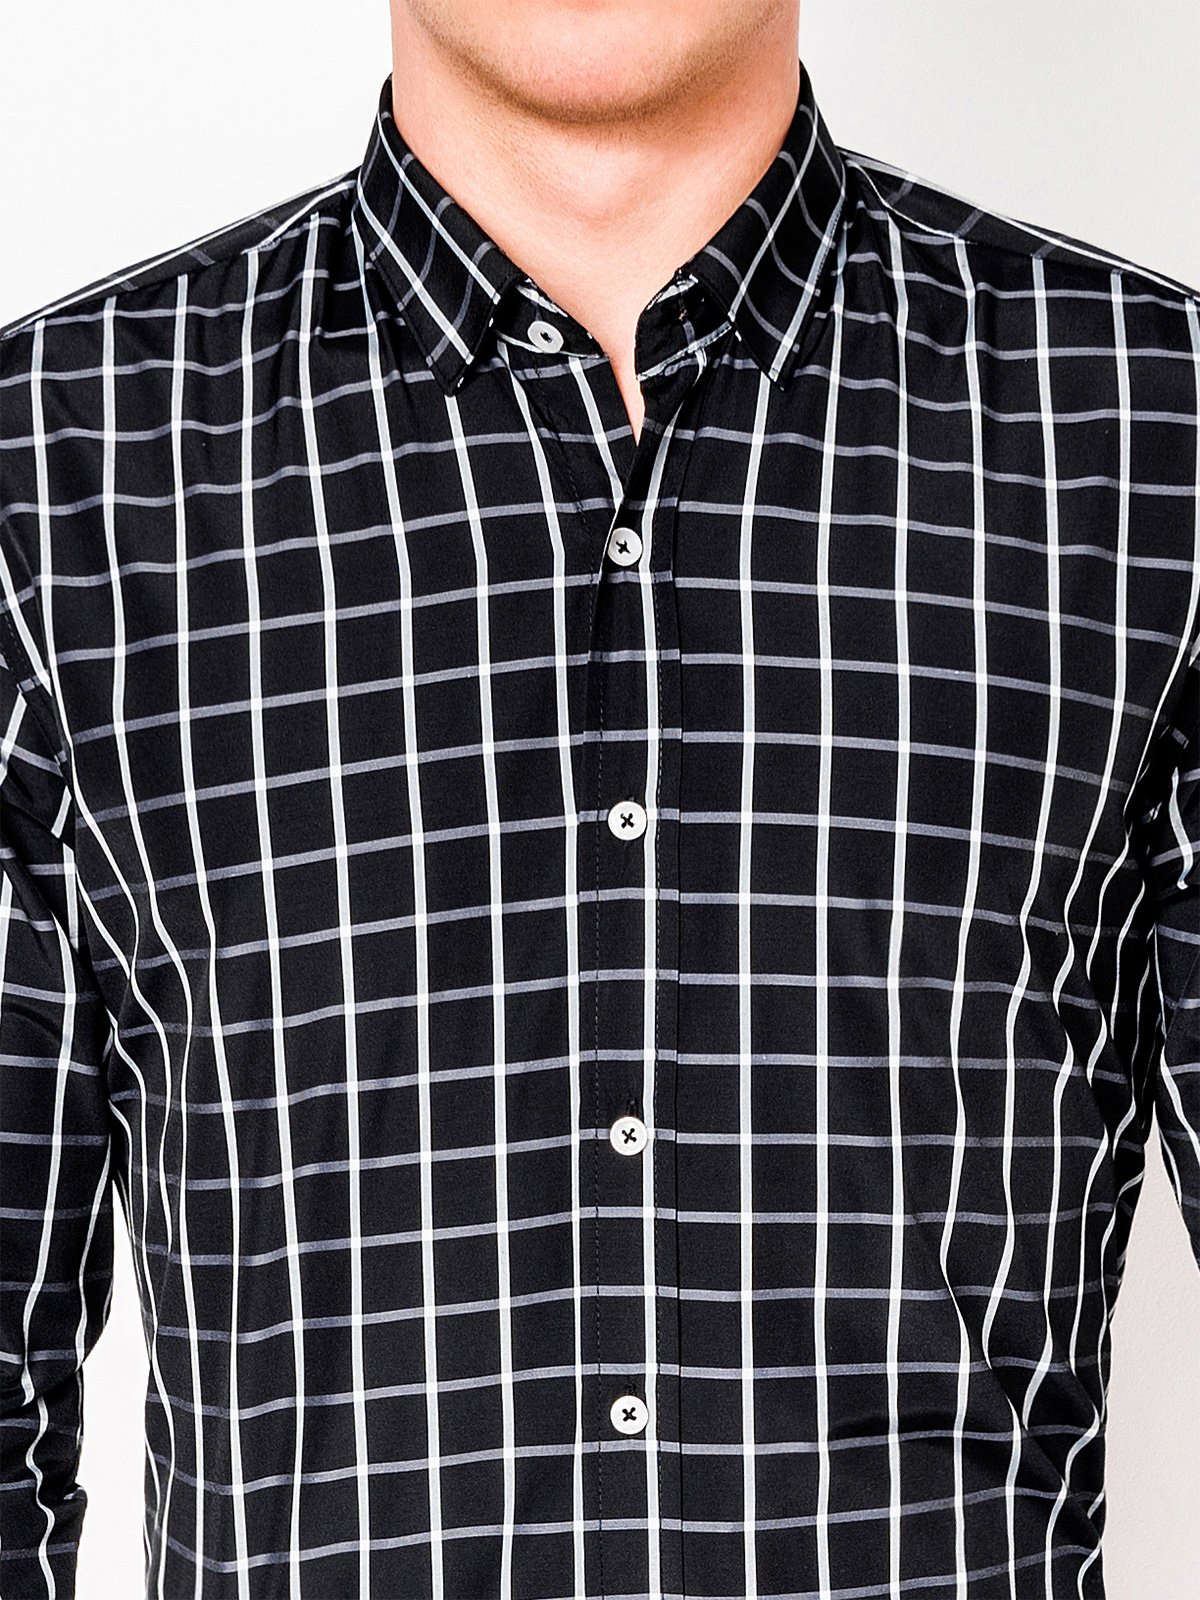 Men's check shirt with long sleeves K445 - black | MODONE wholesale ...